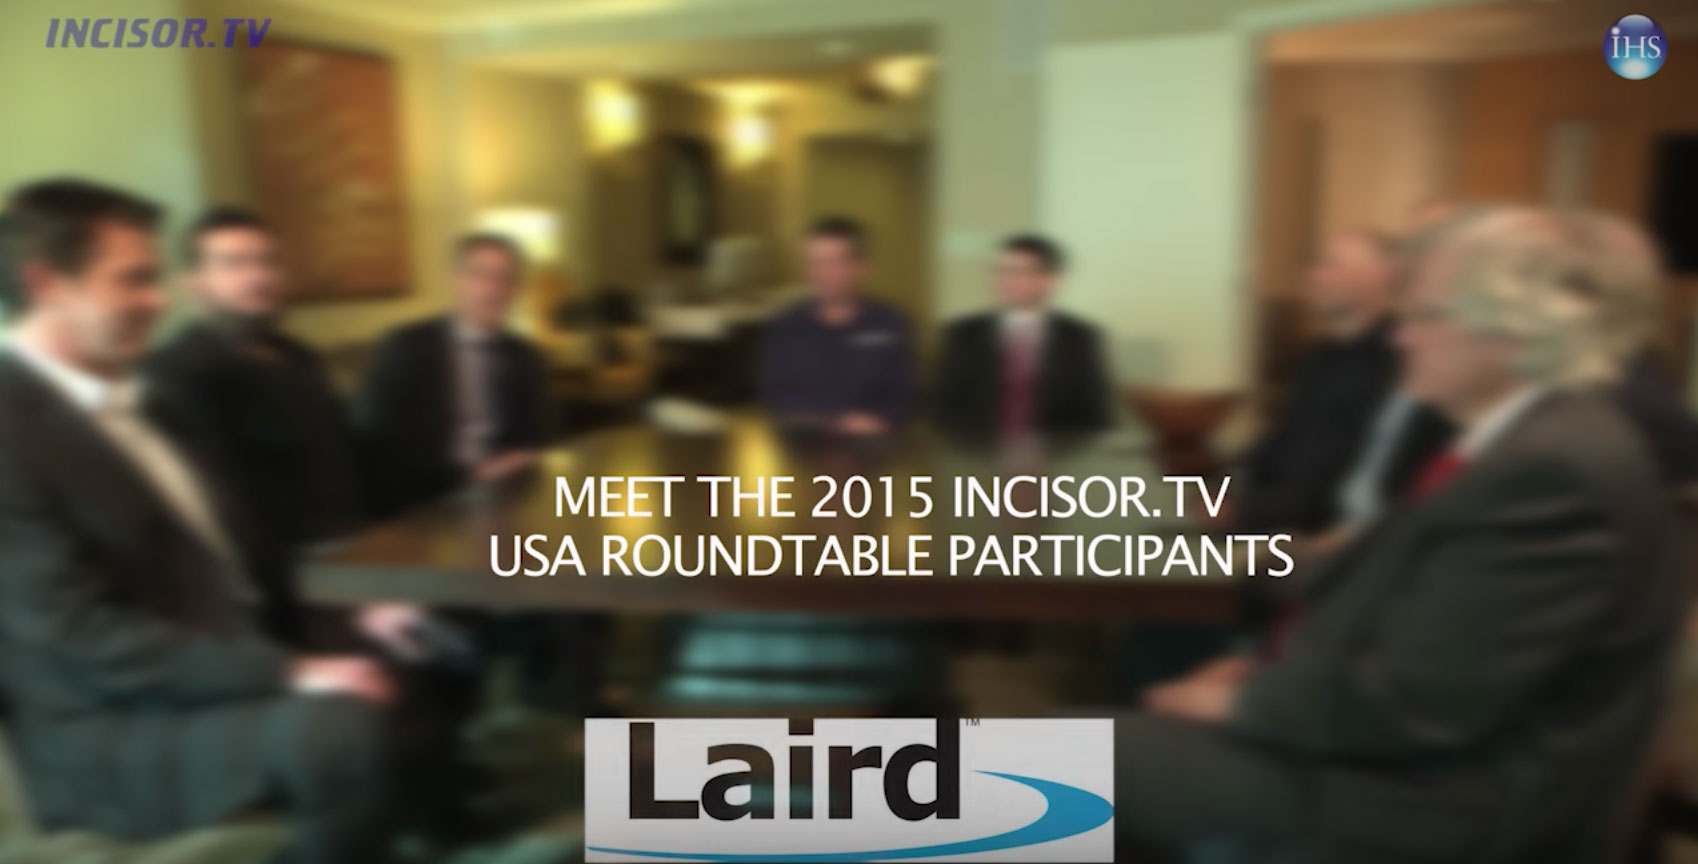 2015 Incisor.TV USA IoT Roundtable interviews - Laird